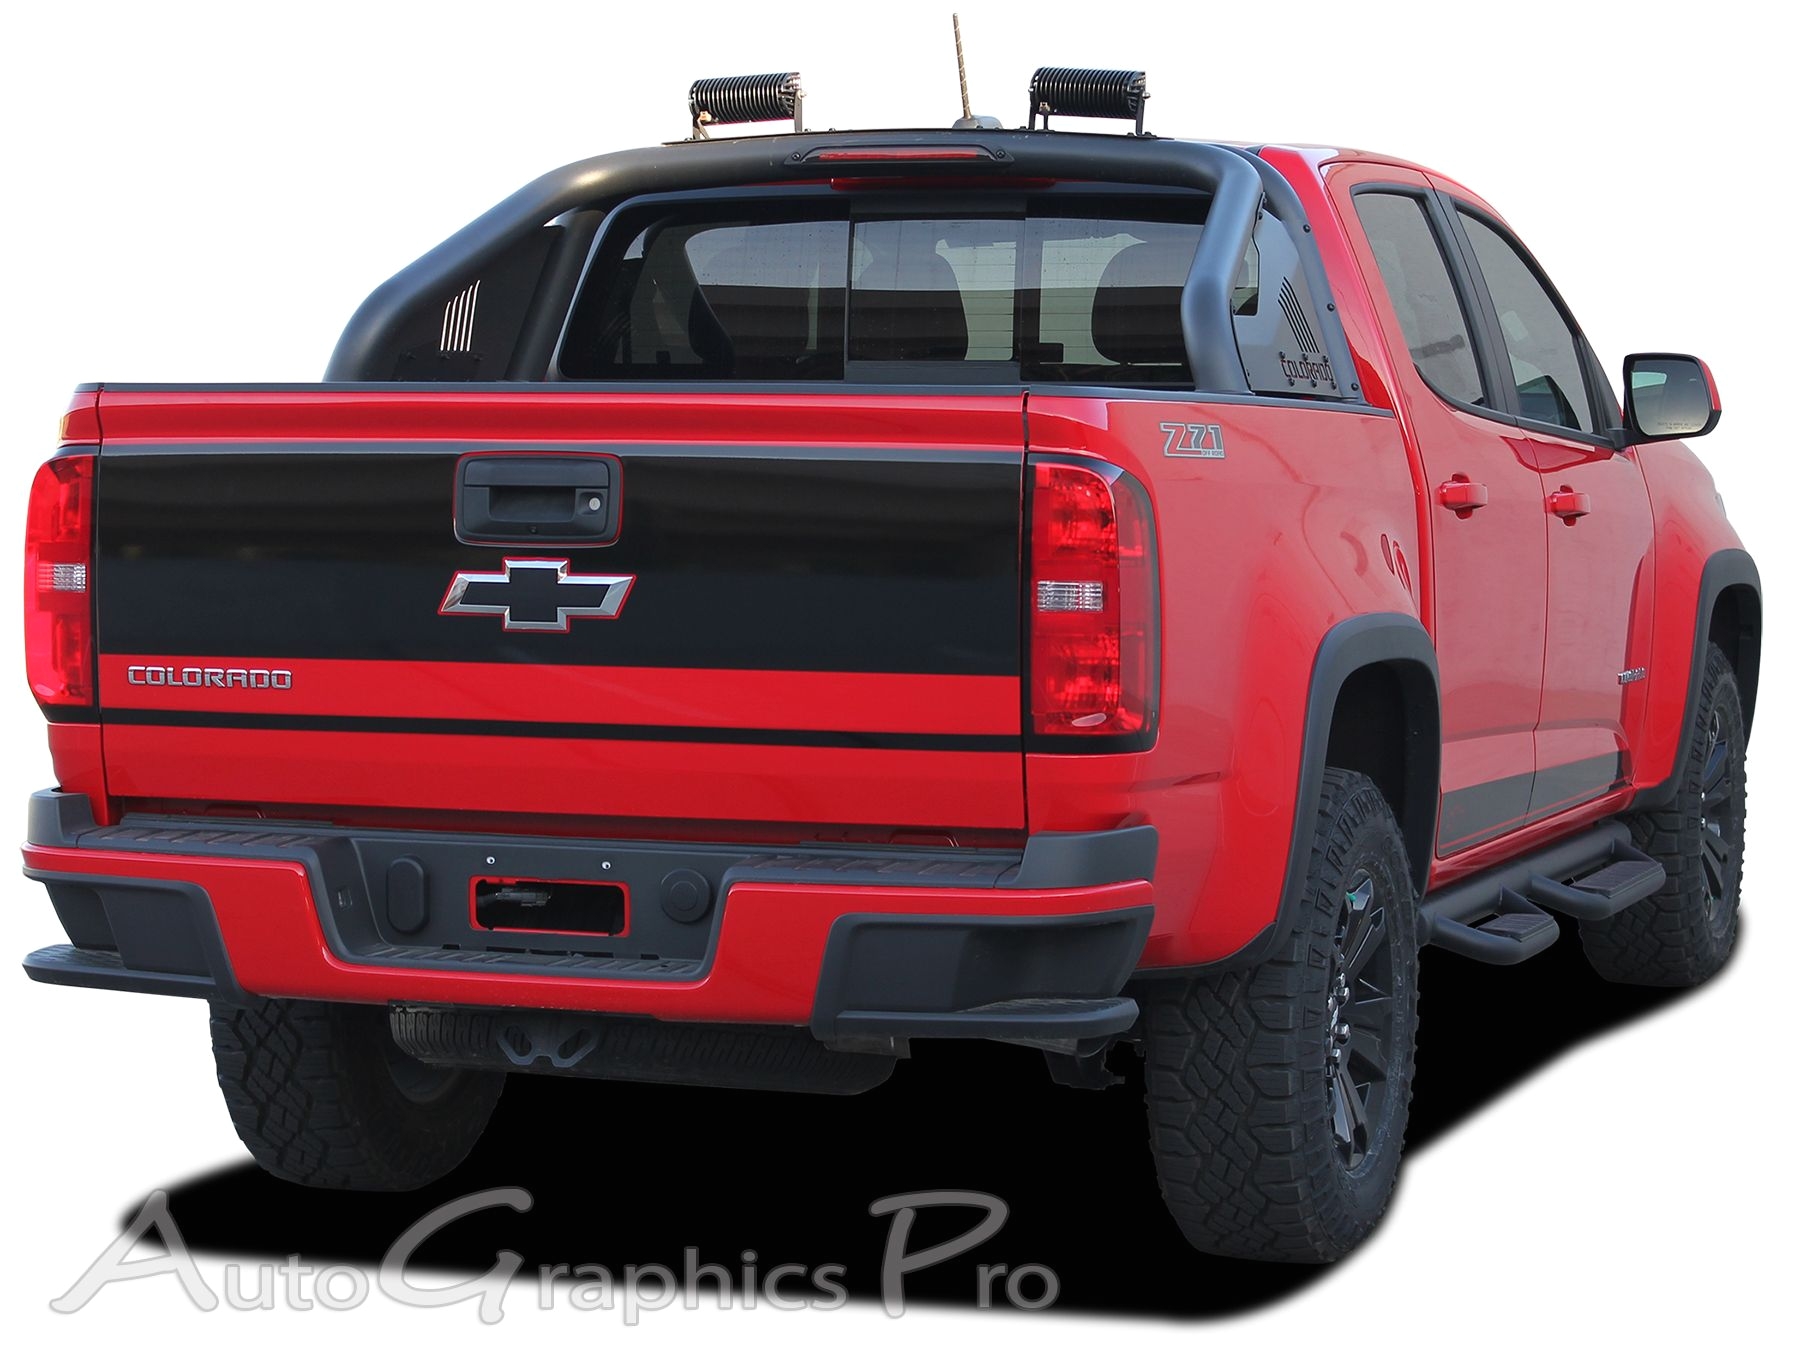 2016 2017 chevy colorado grand rear tailgate accent vinyl graphics stripes kit vinyl graphic stripe decal kits vehicle specific accent striping decals